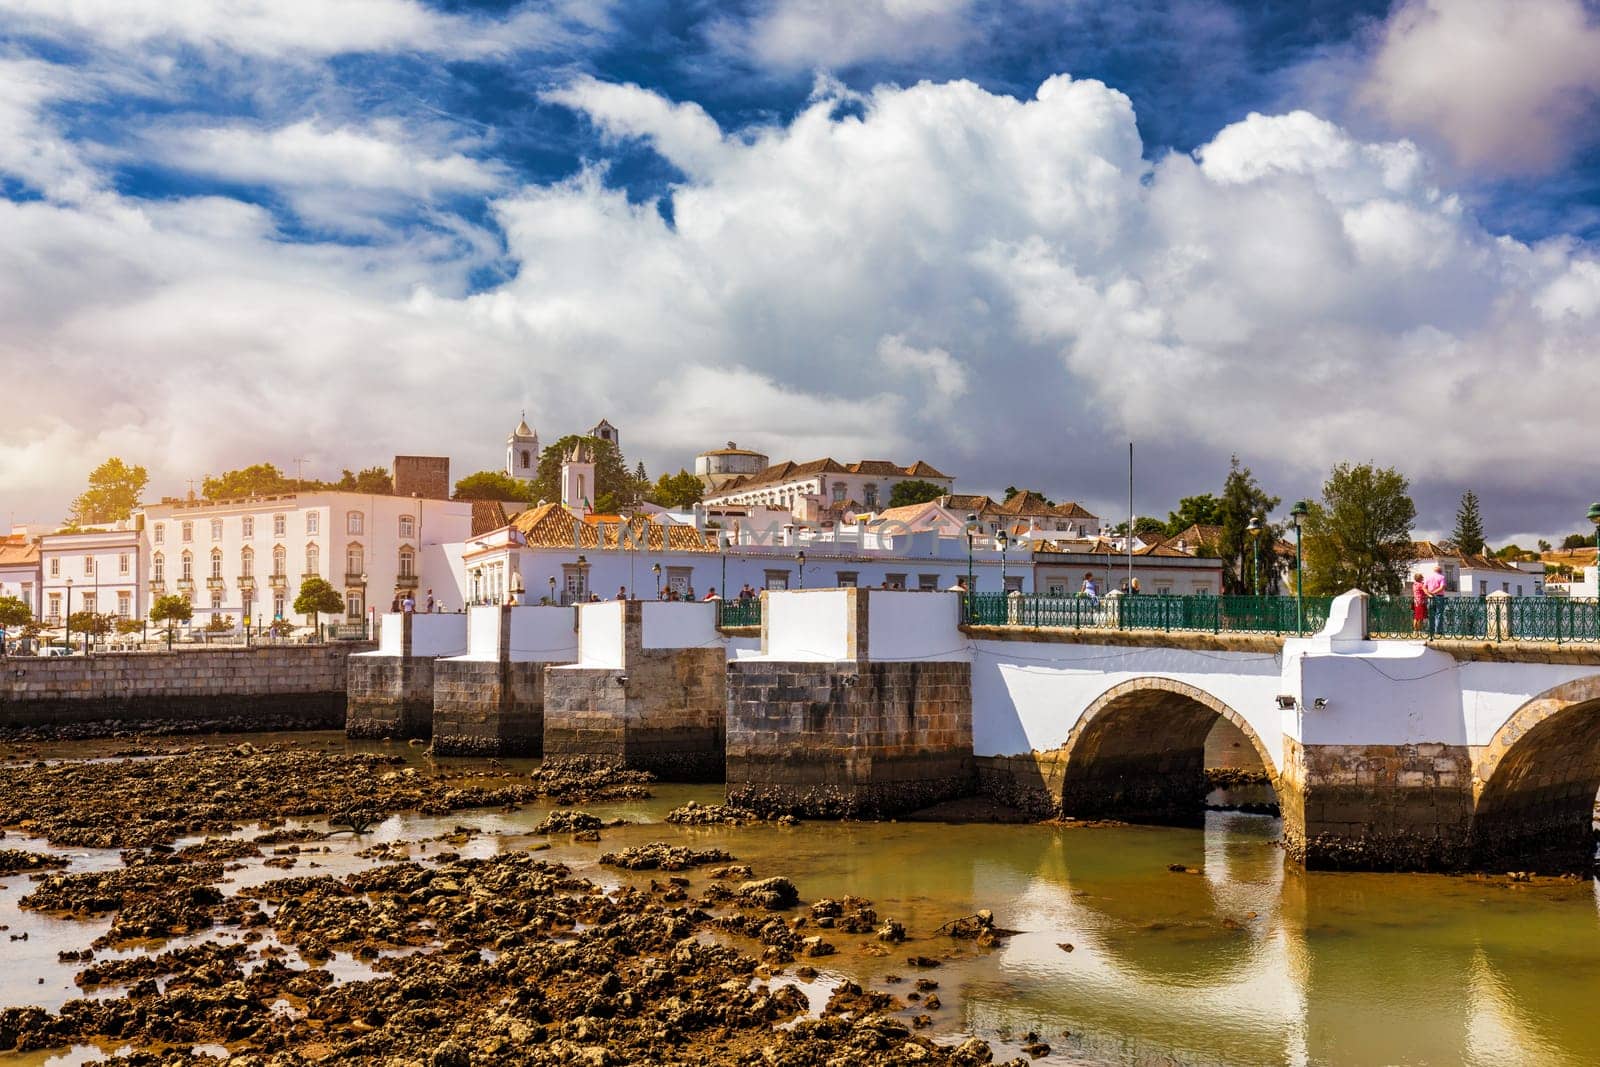 View of the city of Tavira, charming architecture of Tavira, Algarve, Portugal. Santiago of Tavira church in the old town of the beautiful city of Tavira in a sunny day. Algarve region, Portugal by DaLiu